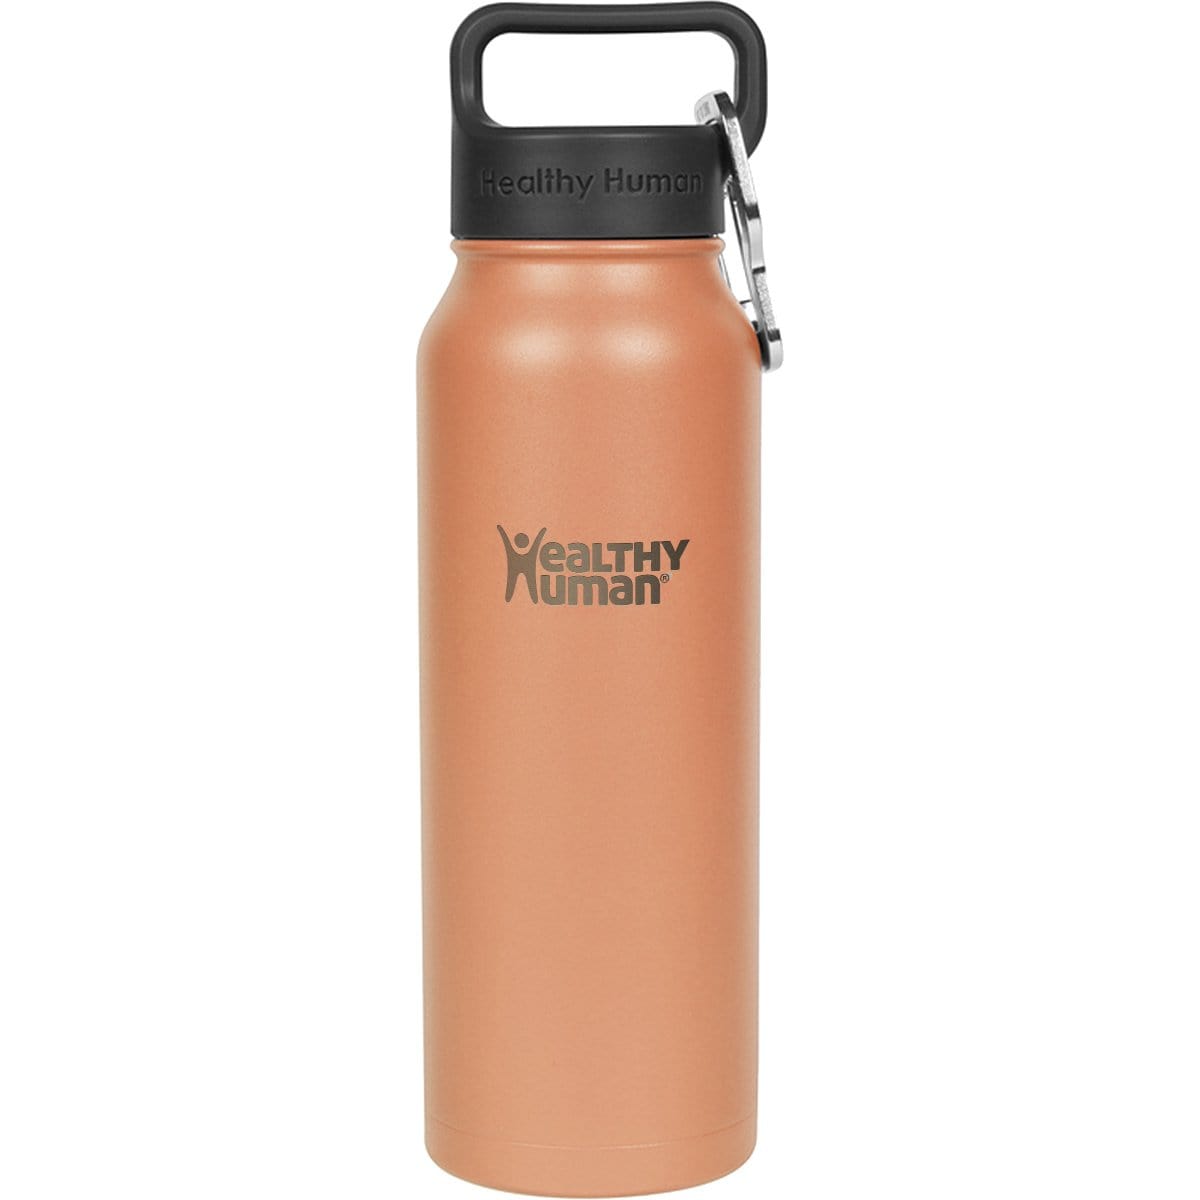 21oz Insulated Stainless Steel Water Bottle | Healthy Human